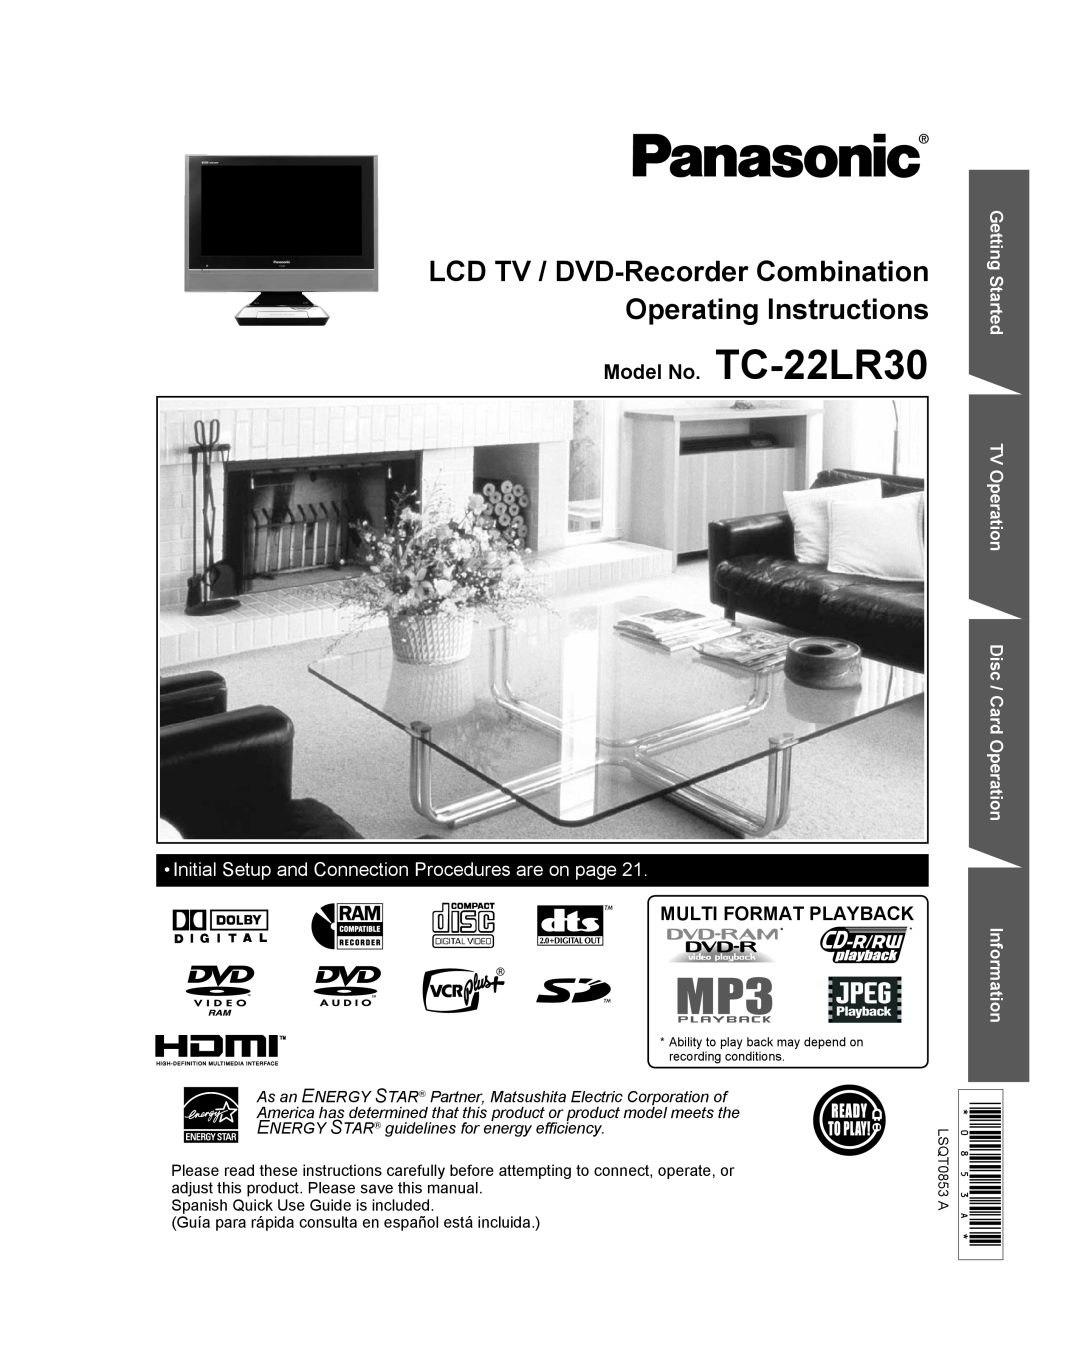 Panasonic TC 22LR30 manual Multi Format Playback, Getting Started TV Operation Disc / Card Operation Information 